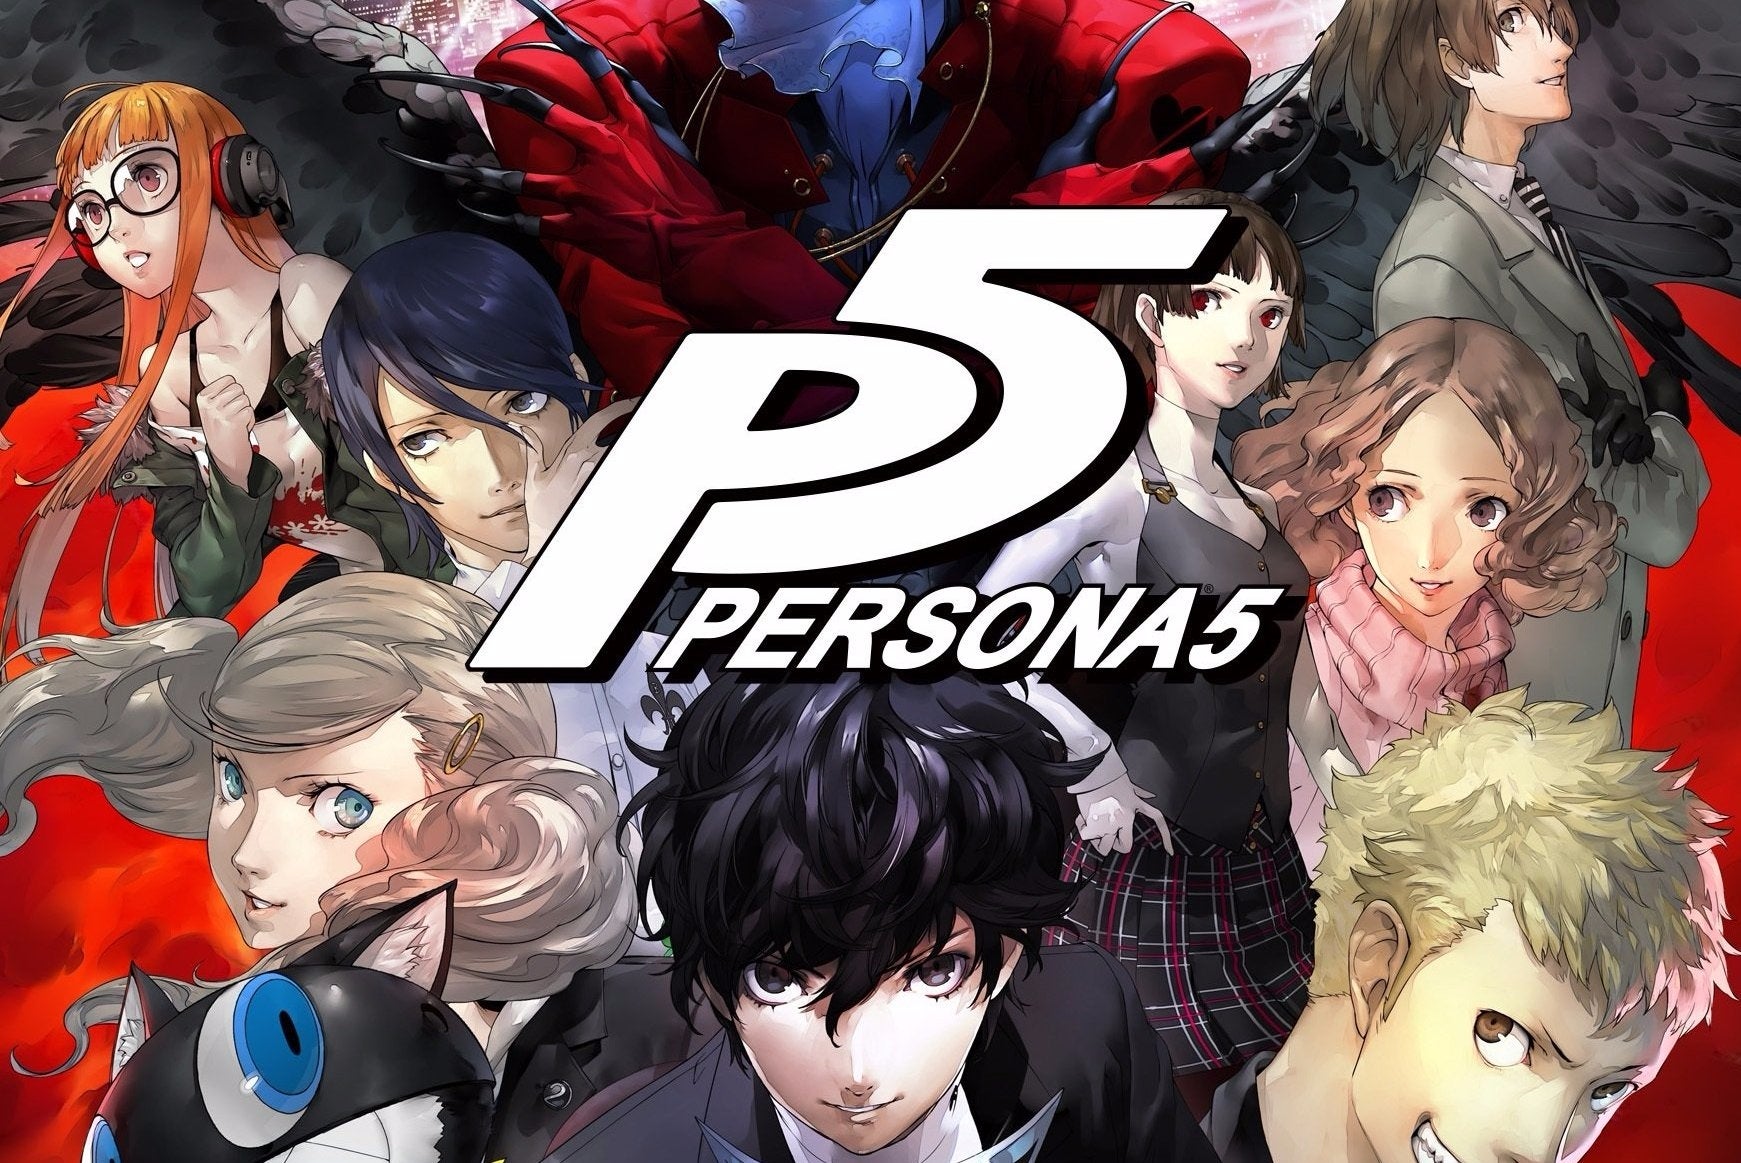 Persona 5 finally has a western release date 